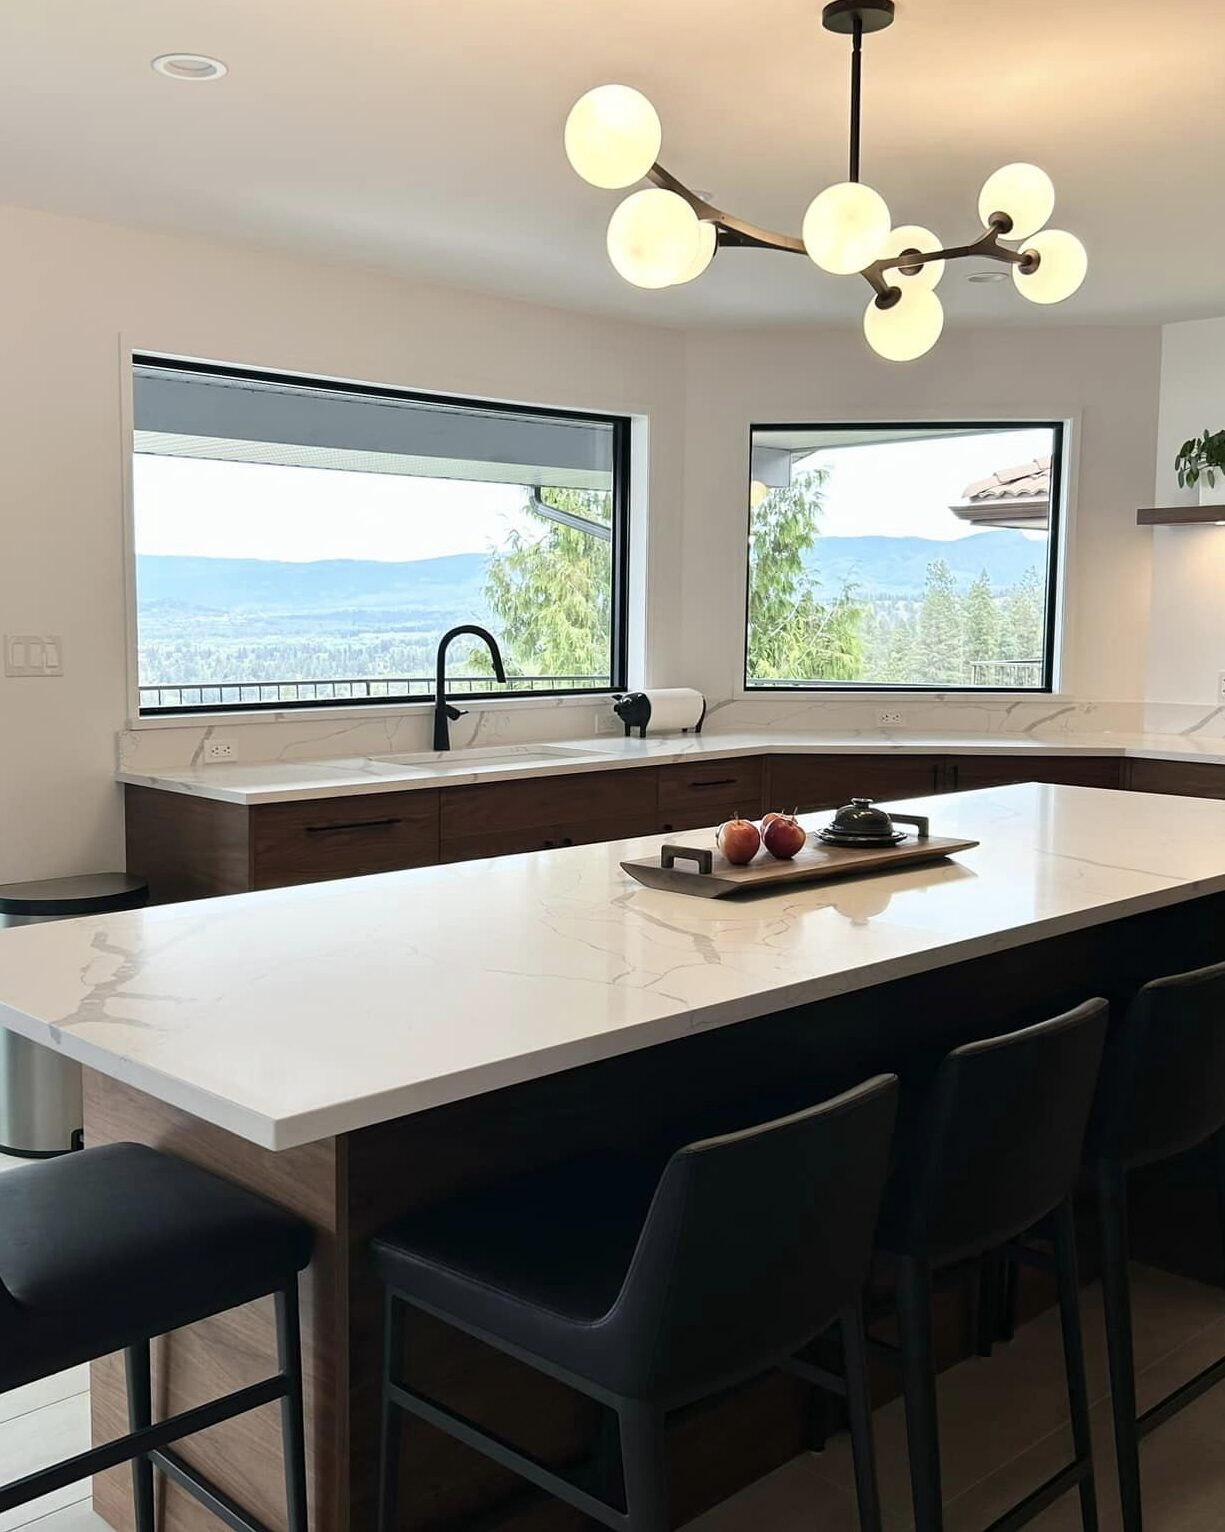 Complimenting this open kitchen design with large views of the neighboring vineyard and Okanagan lake views.